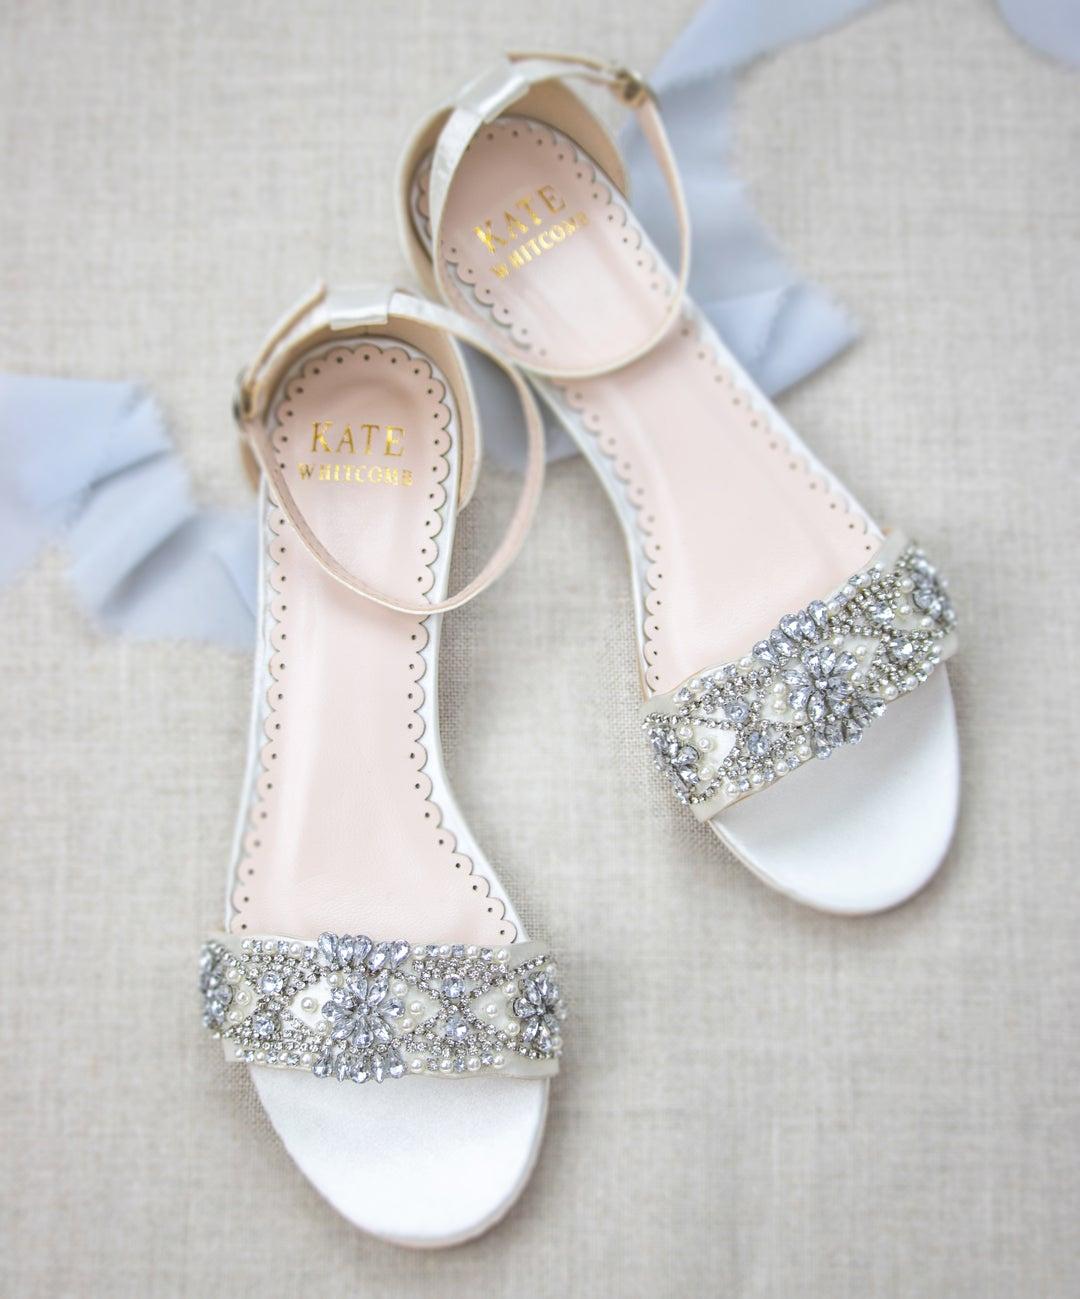 24 Pairs of Wedding Flats That Are Chic & Comfortable